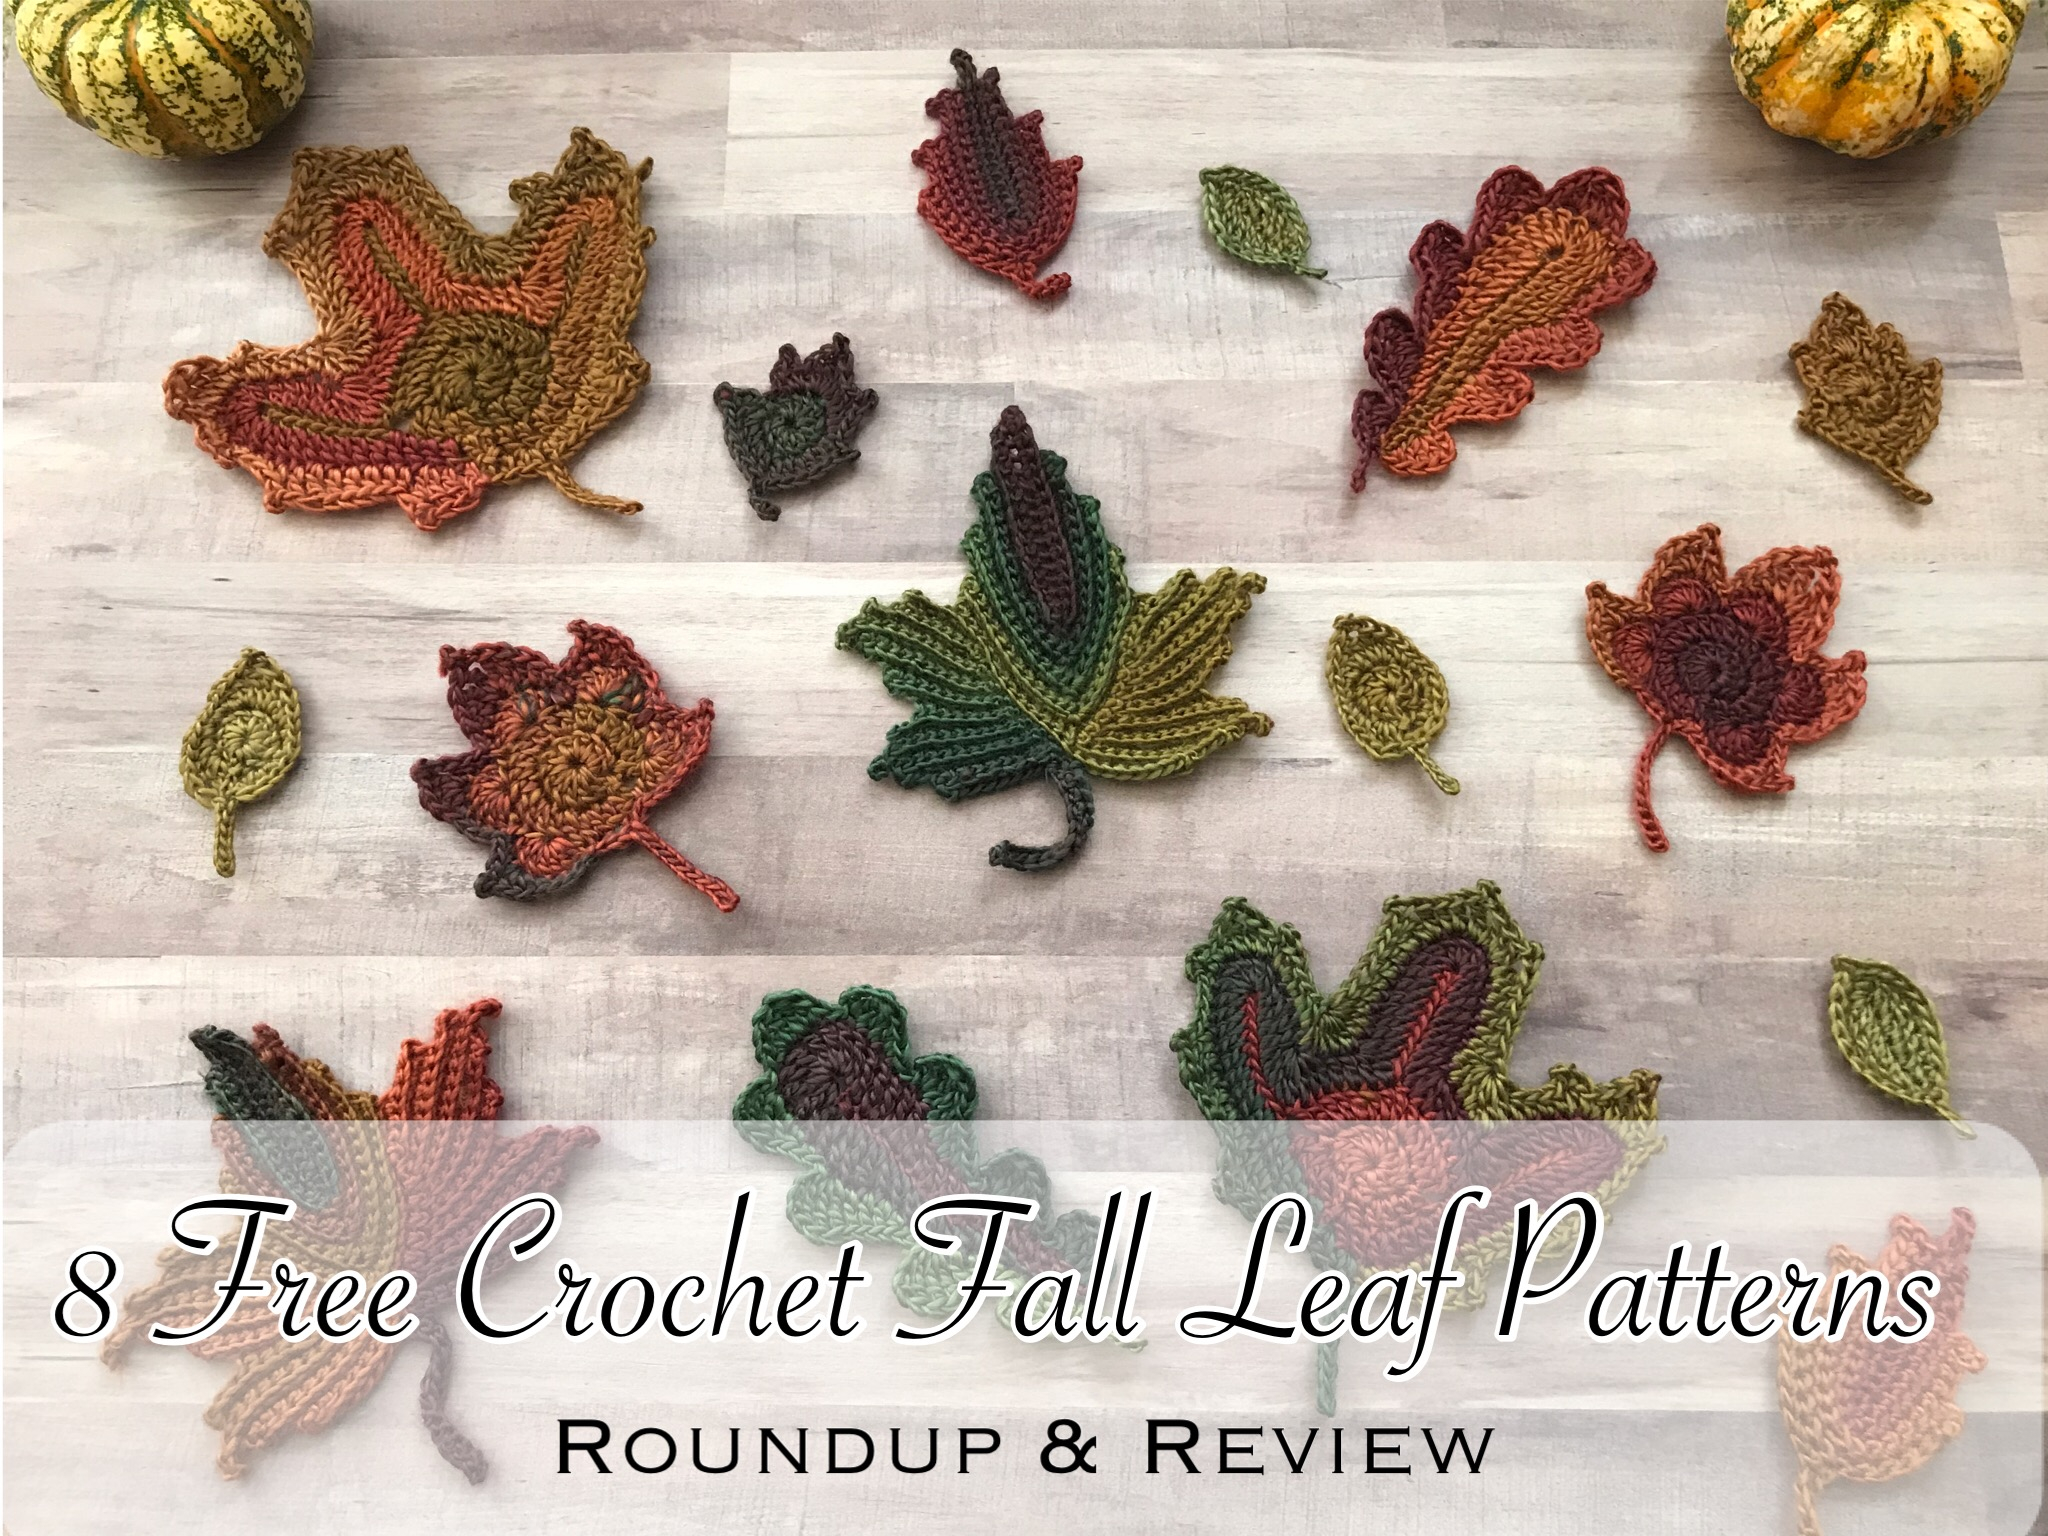 Crochet Leaf Pattern Video 8 Free Crochet Fall Leaf Patterns Roundup Review Crafting For Weeks